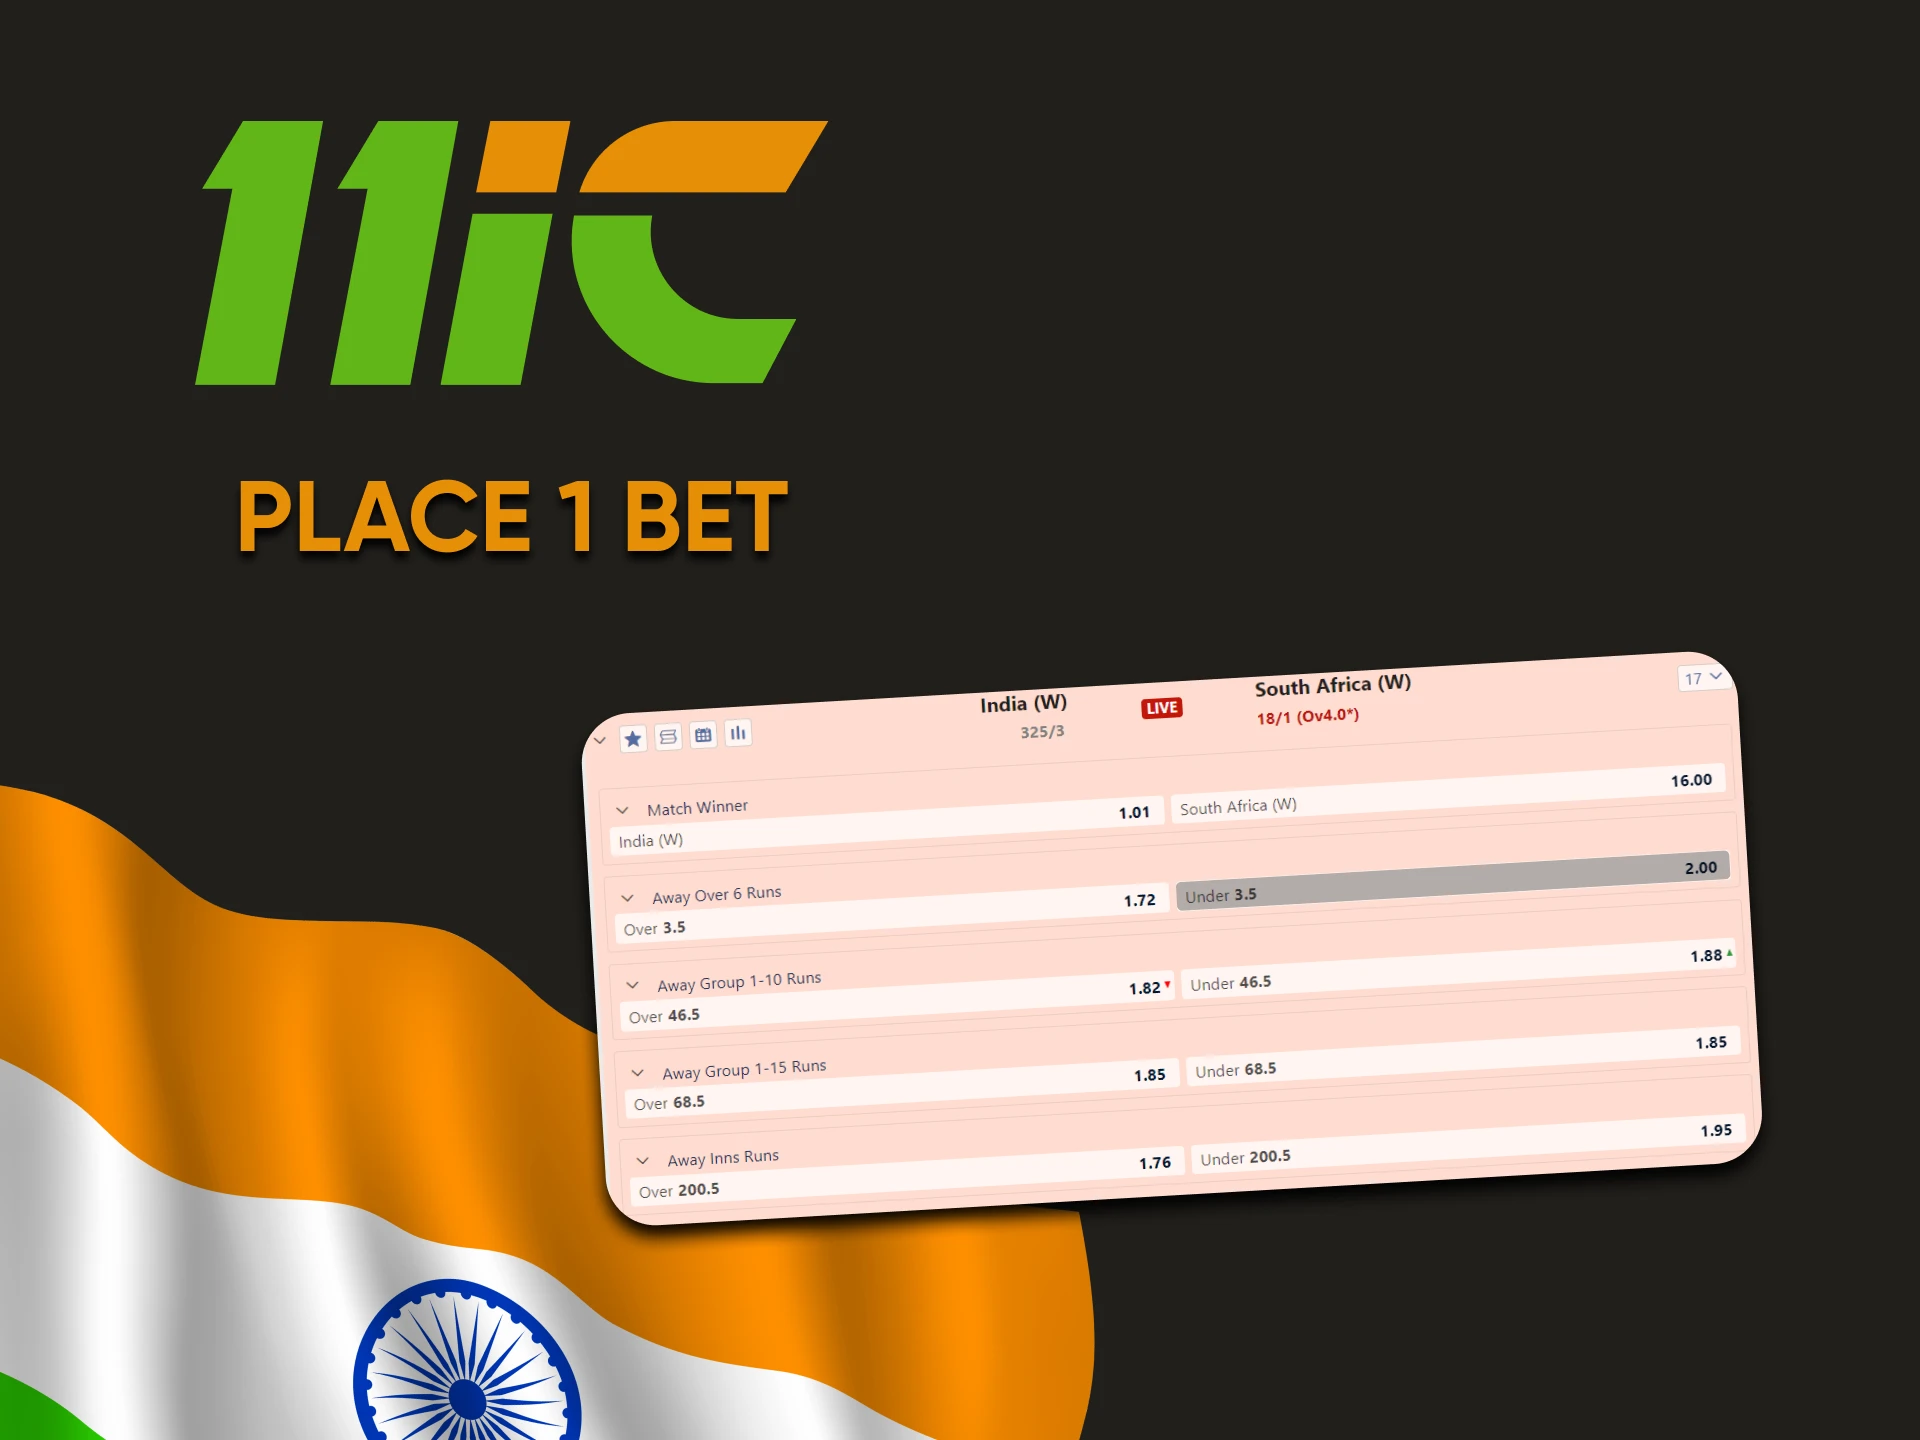 You can now place your first bet on 11ic.